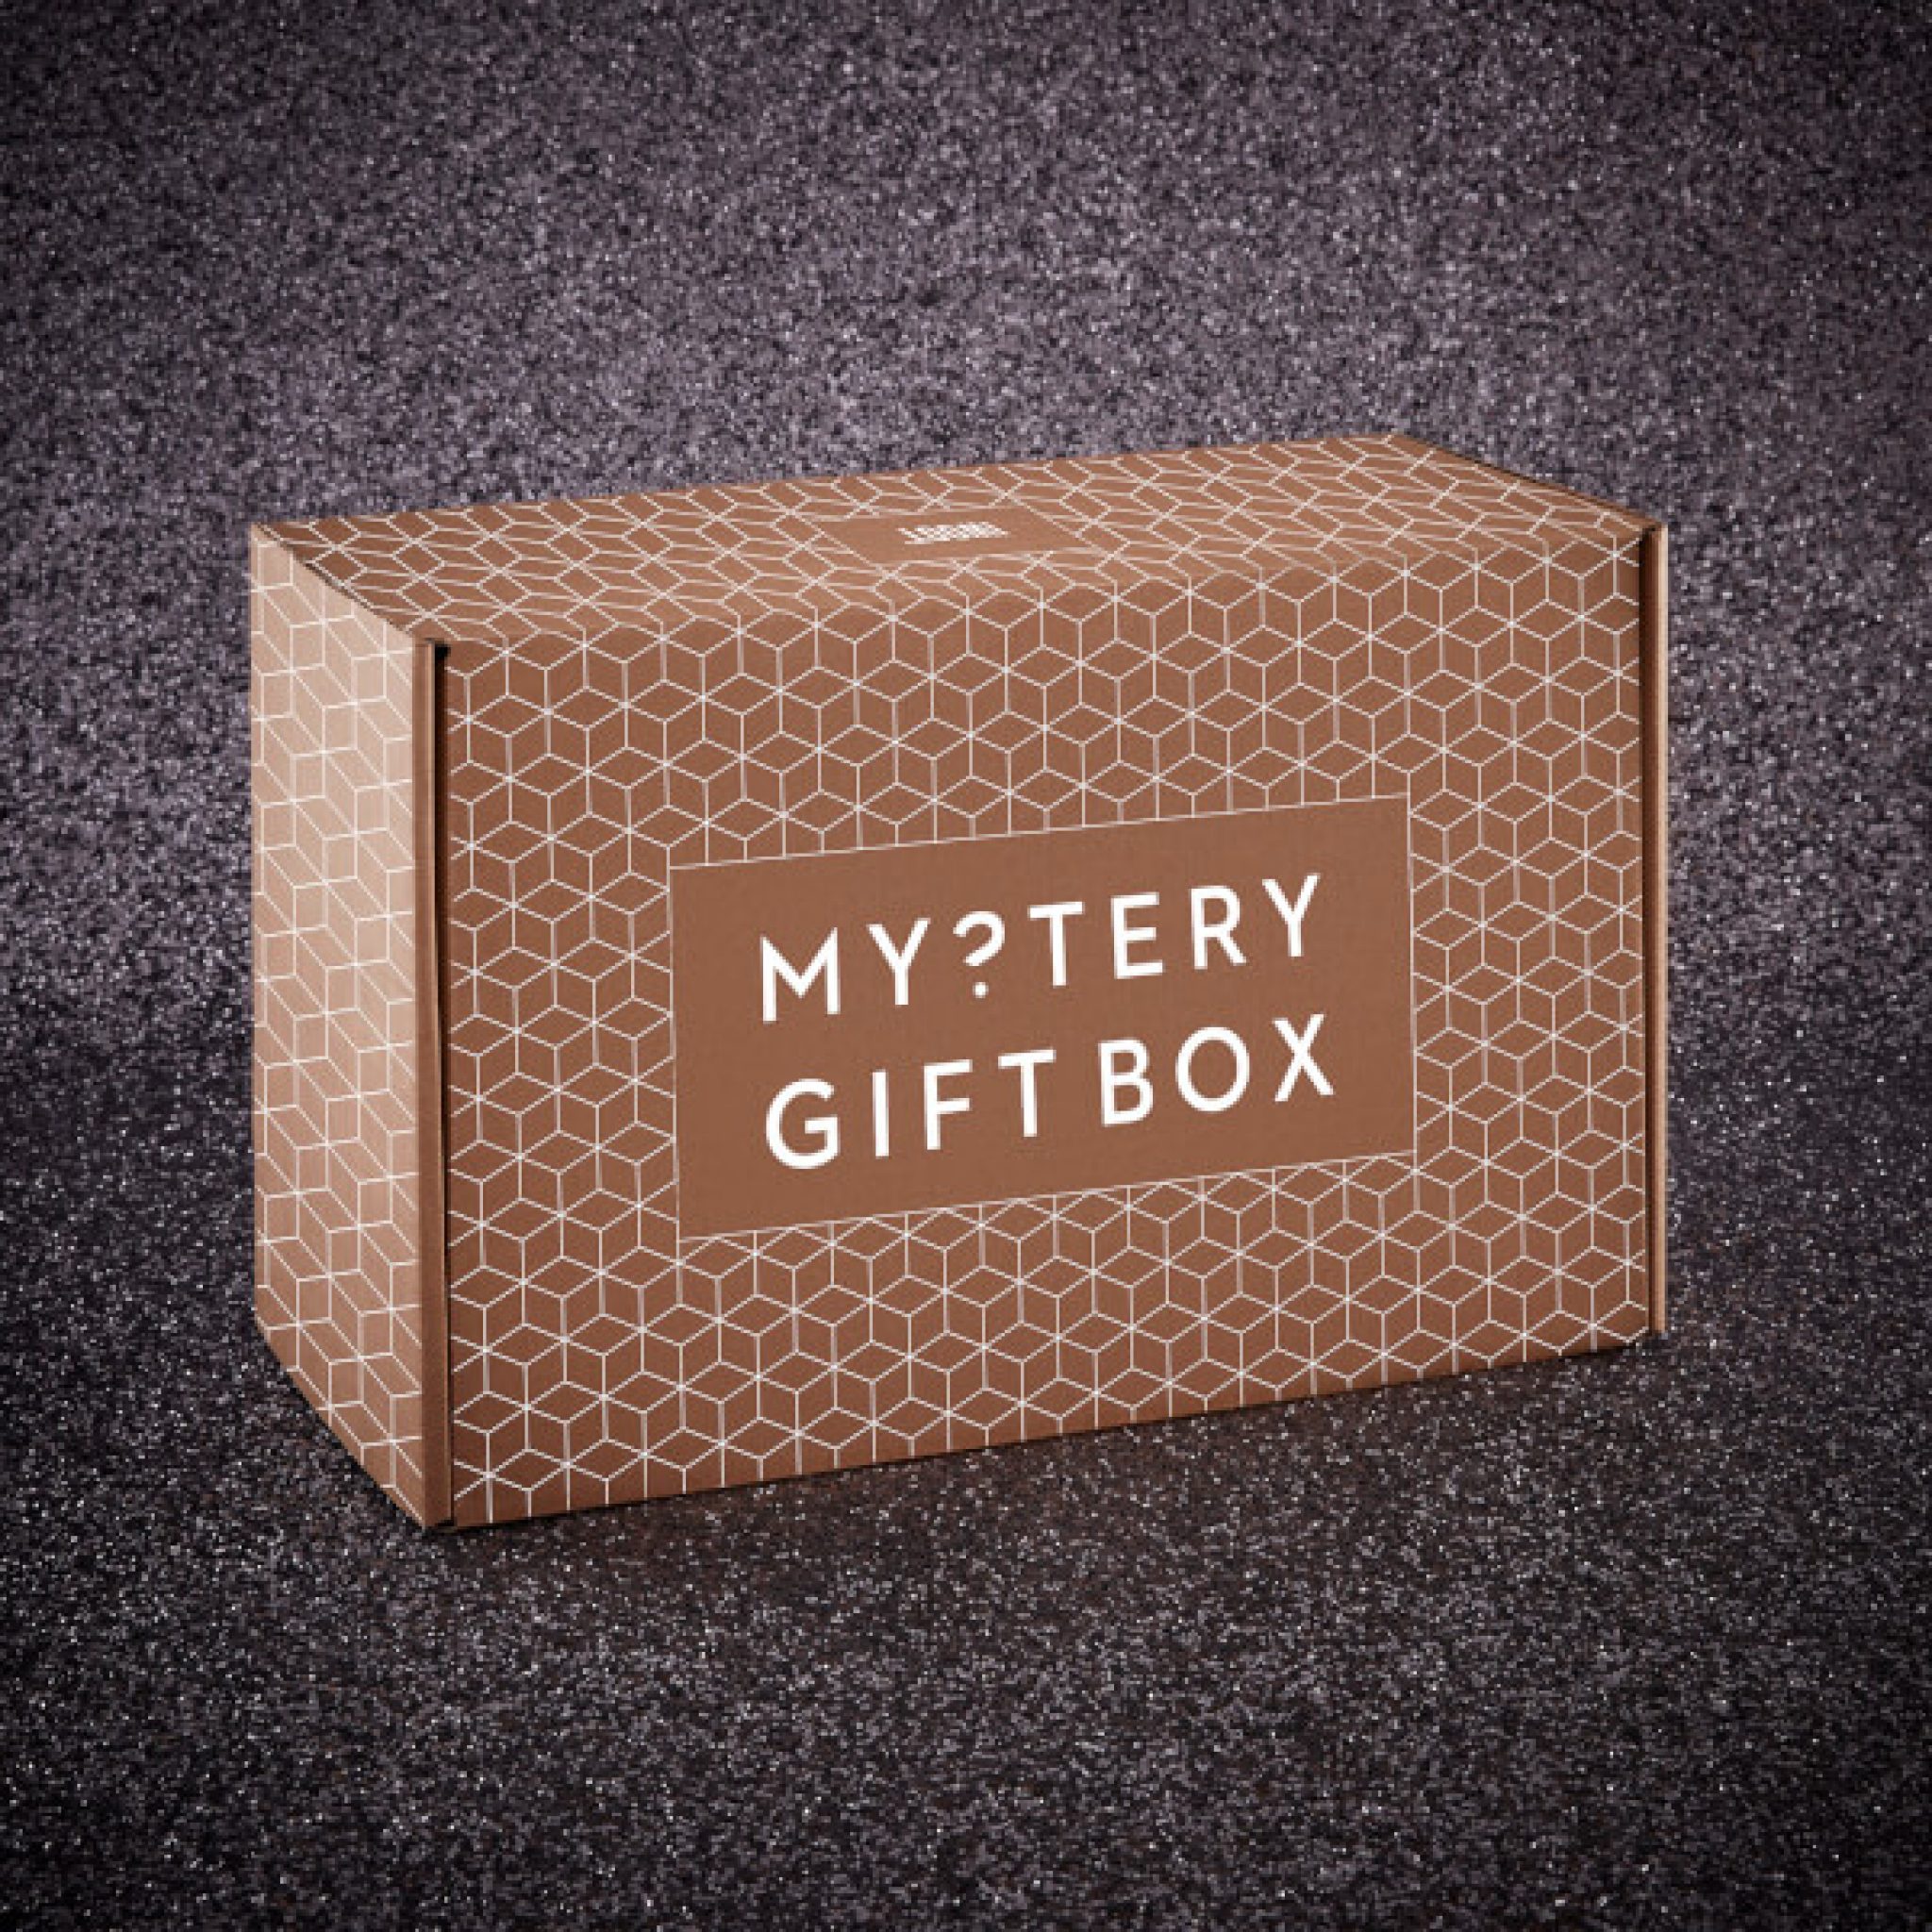 Mystery Gift Box For Him.